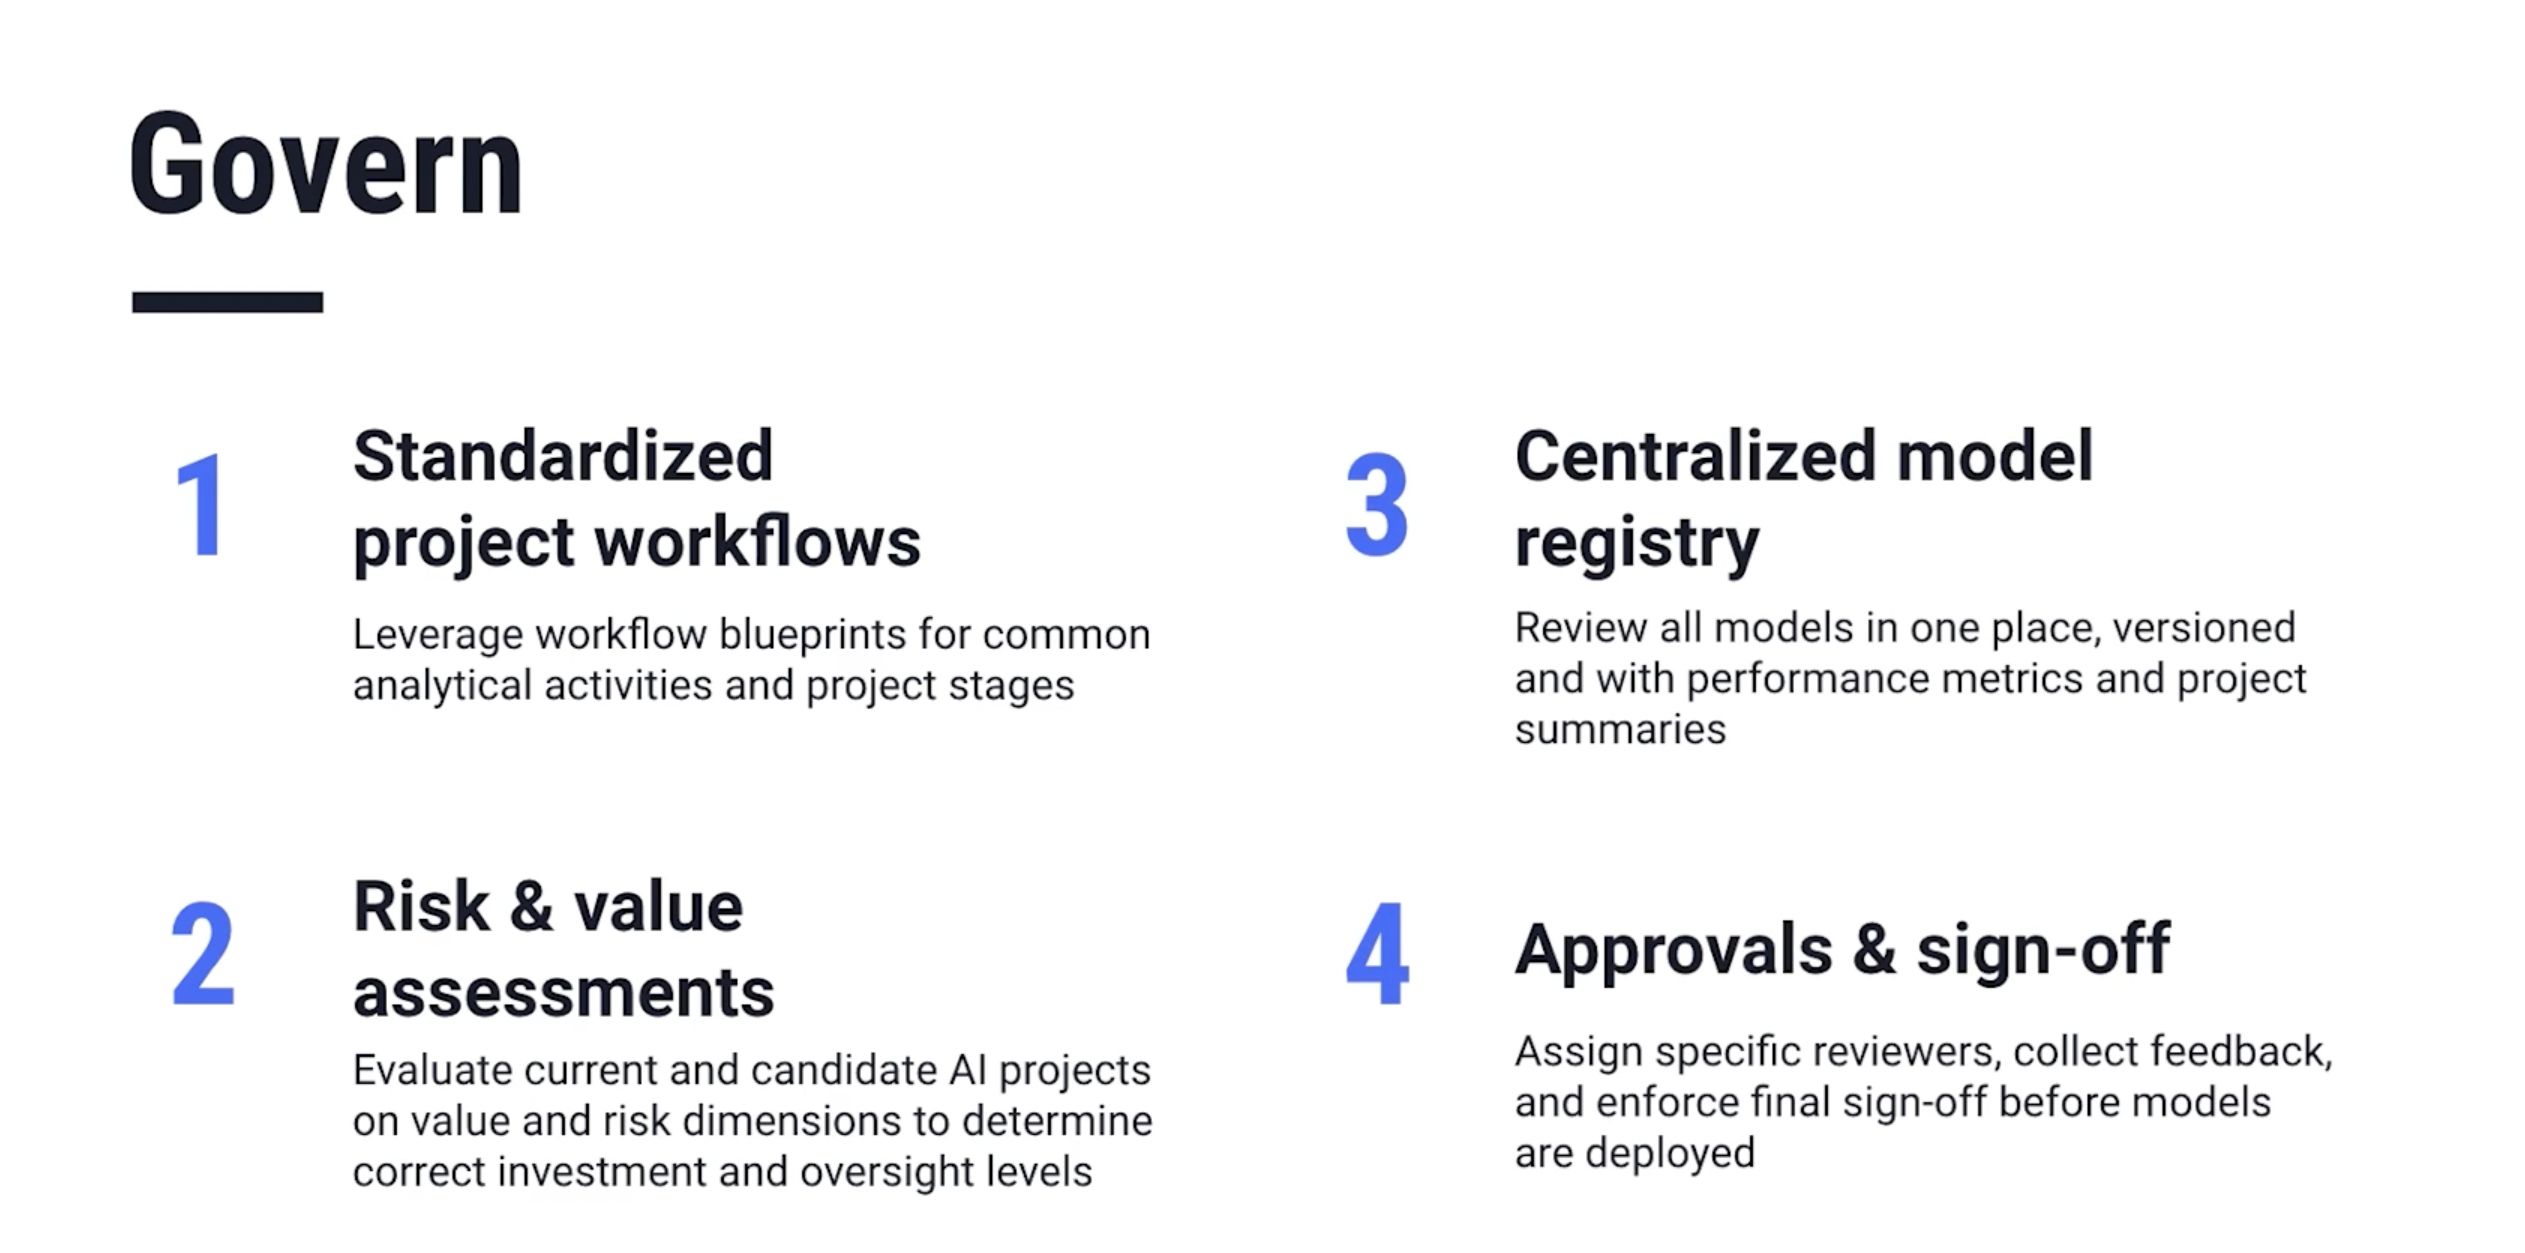 An overview of the four main features of Govern: Standardized project workflows, risk and value assessments, centralized model registry, and approvals and sign-off.